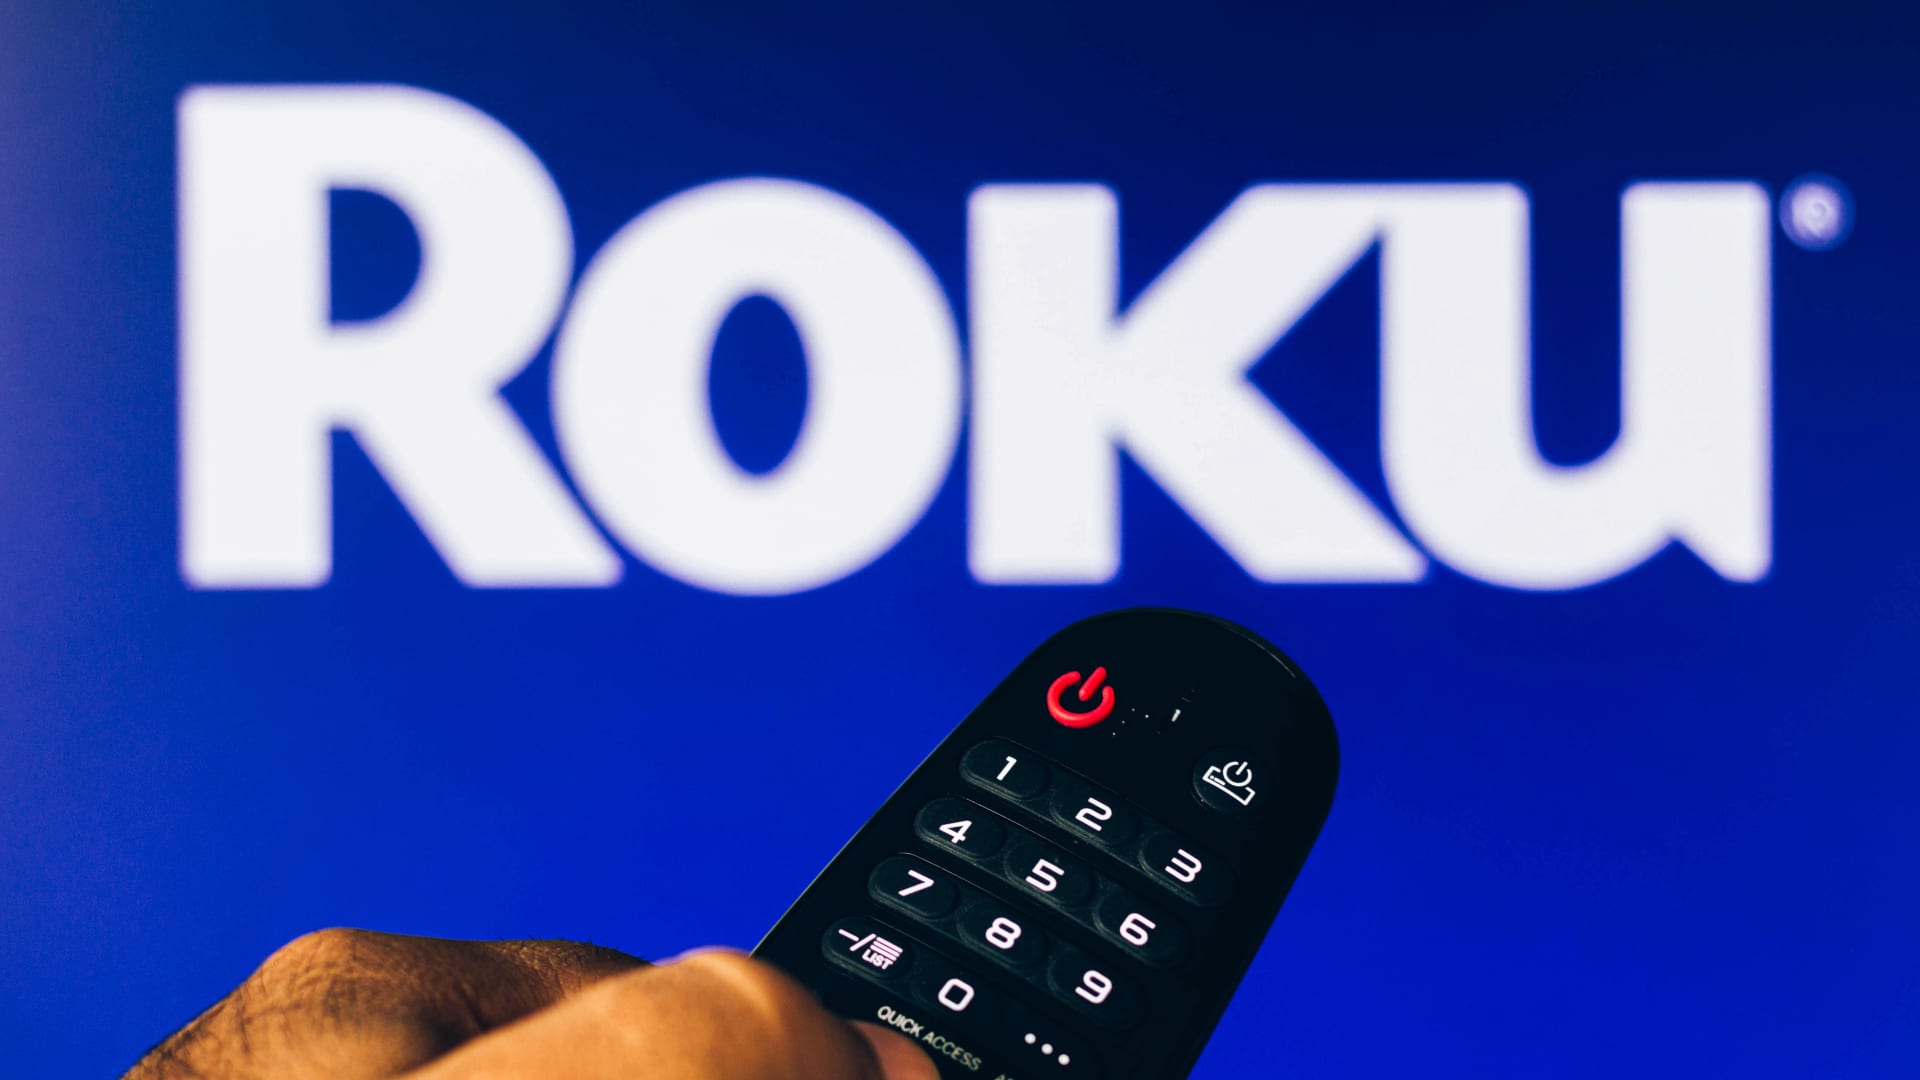 Roku stock plunges 23% after missing earnings